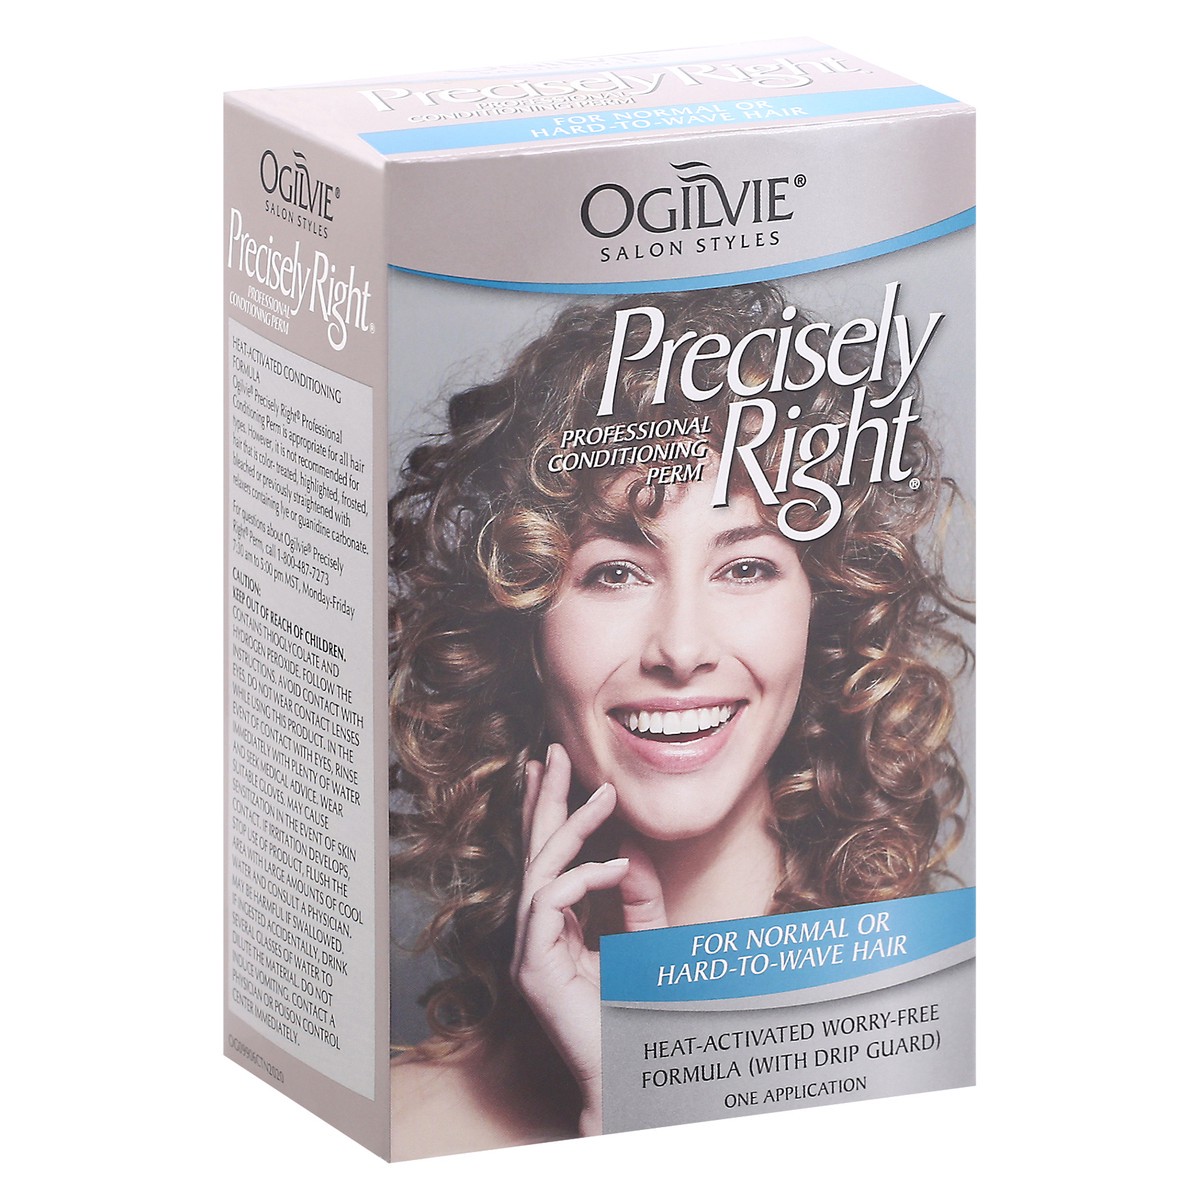 slide 2 of 9, Ogilvie Salon Styles Professional Conditioning Perm For Normal Or Hard-To-Wave Hair Precisely Right, 1 ct